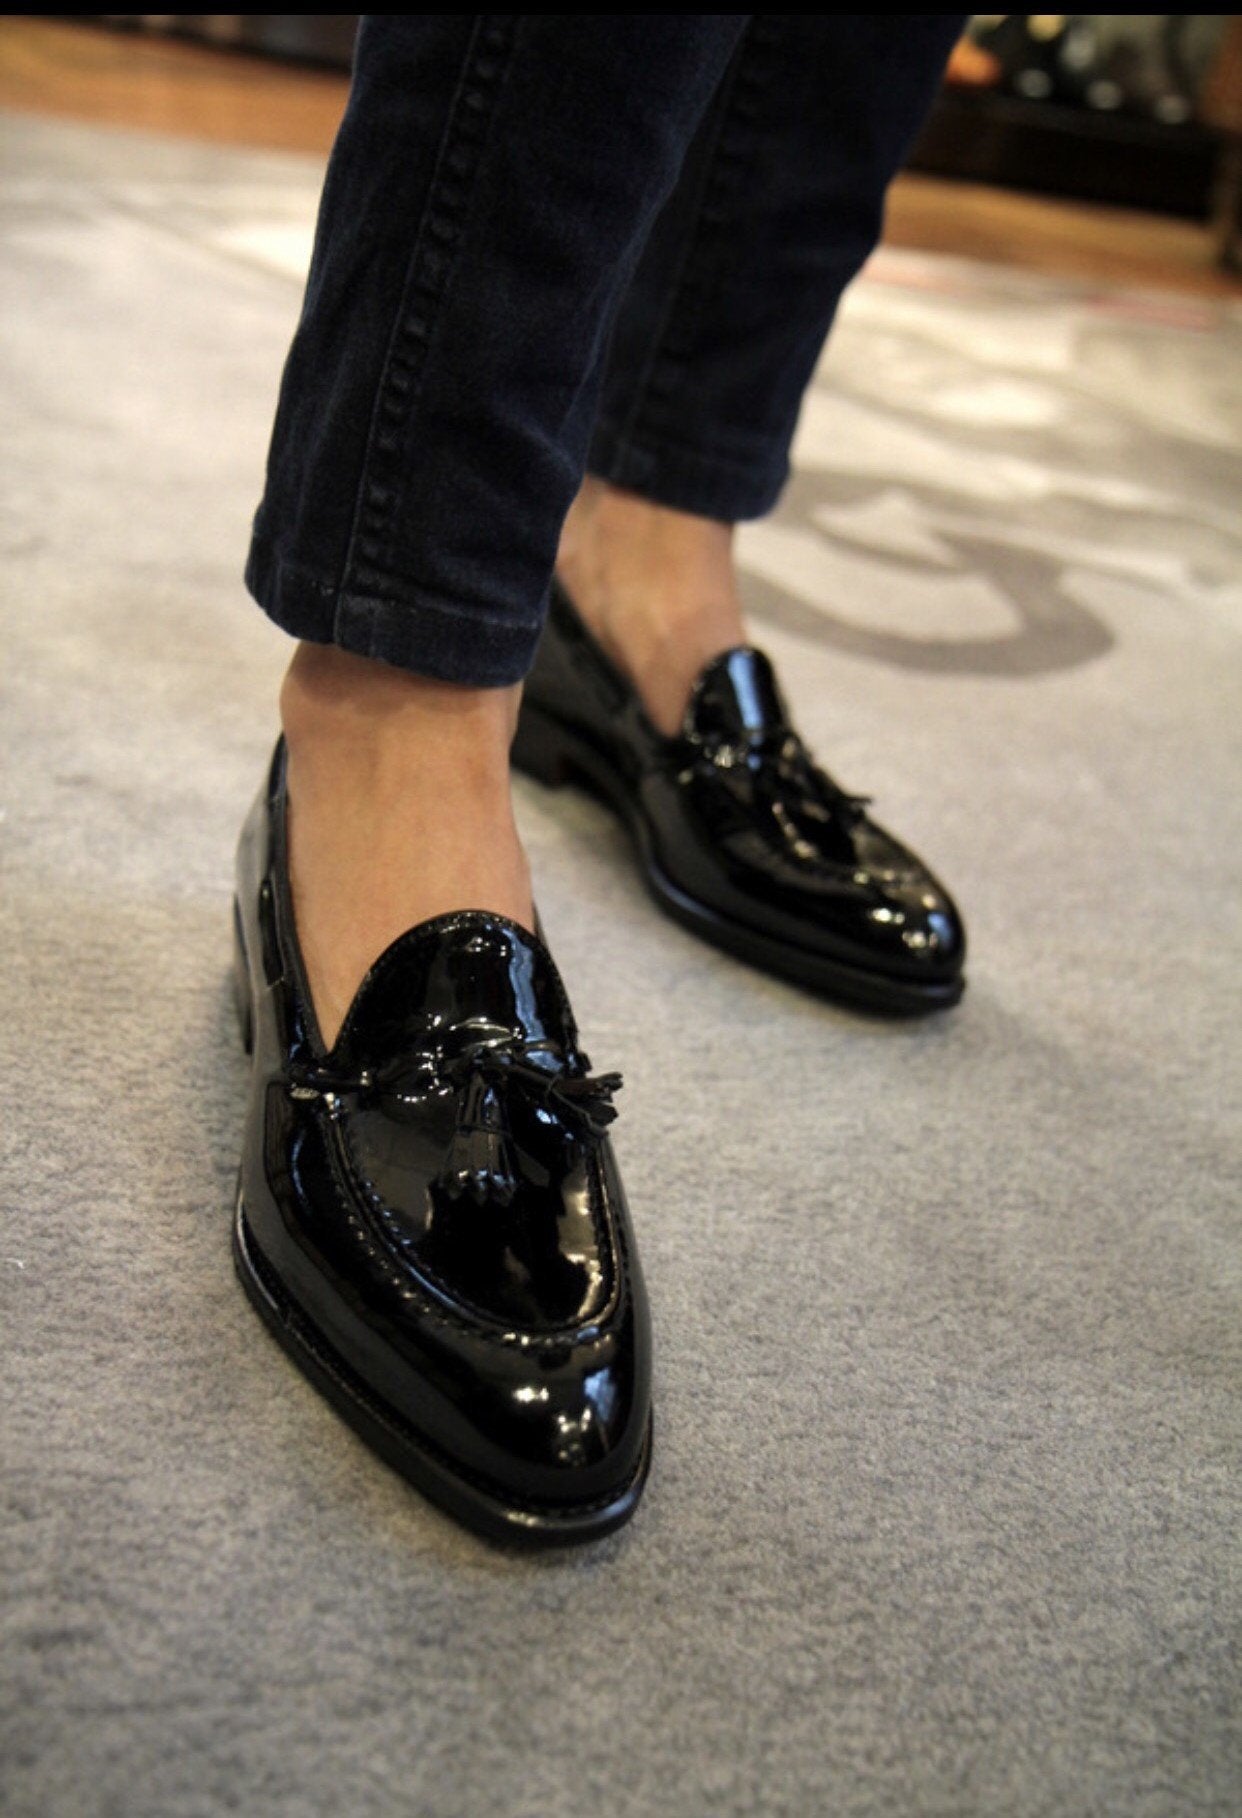 Classic Patent Slipons With Tassels For Men-FunkyTradition - FunkyTradition